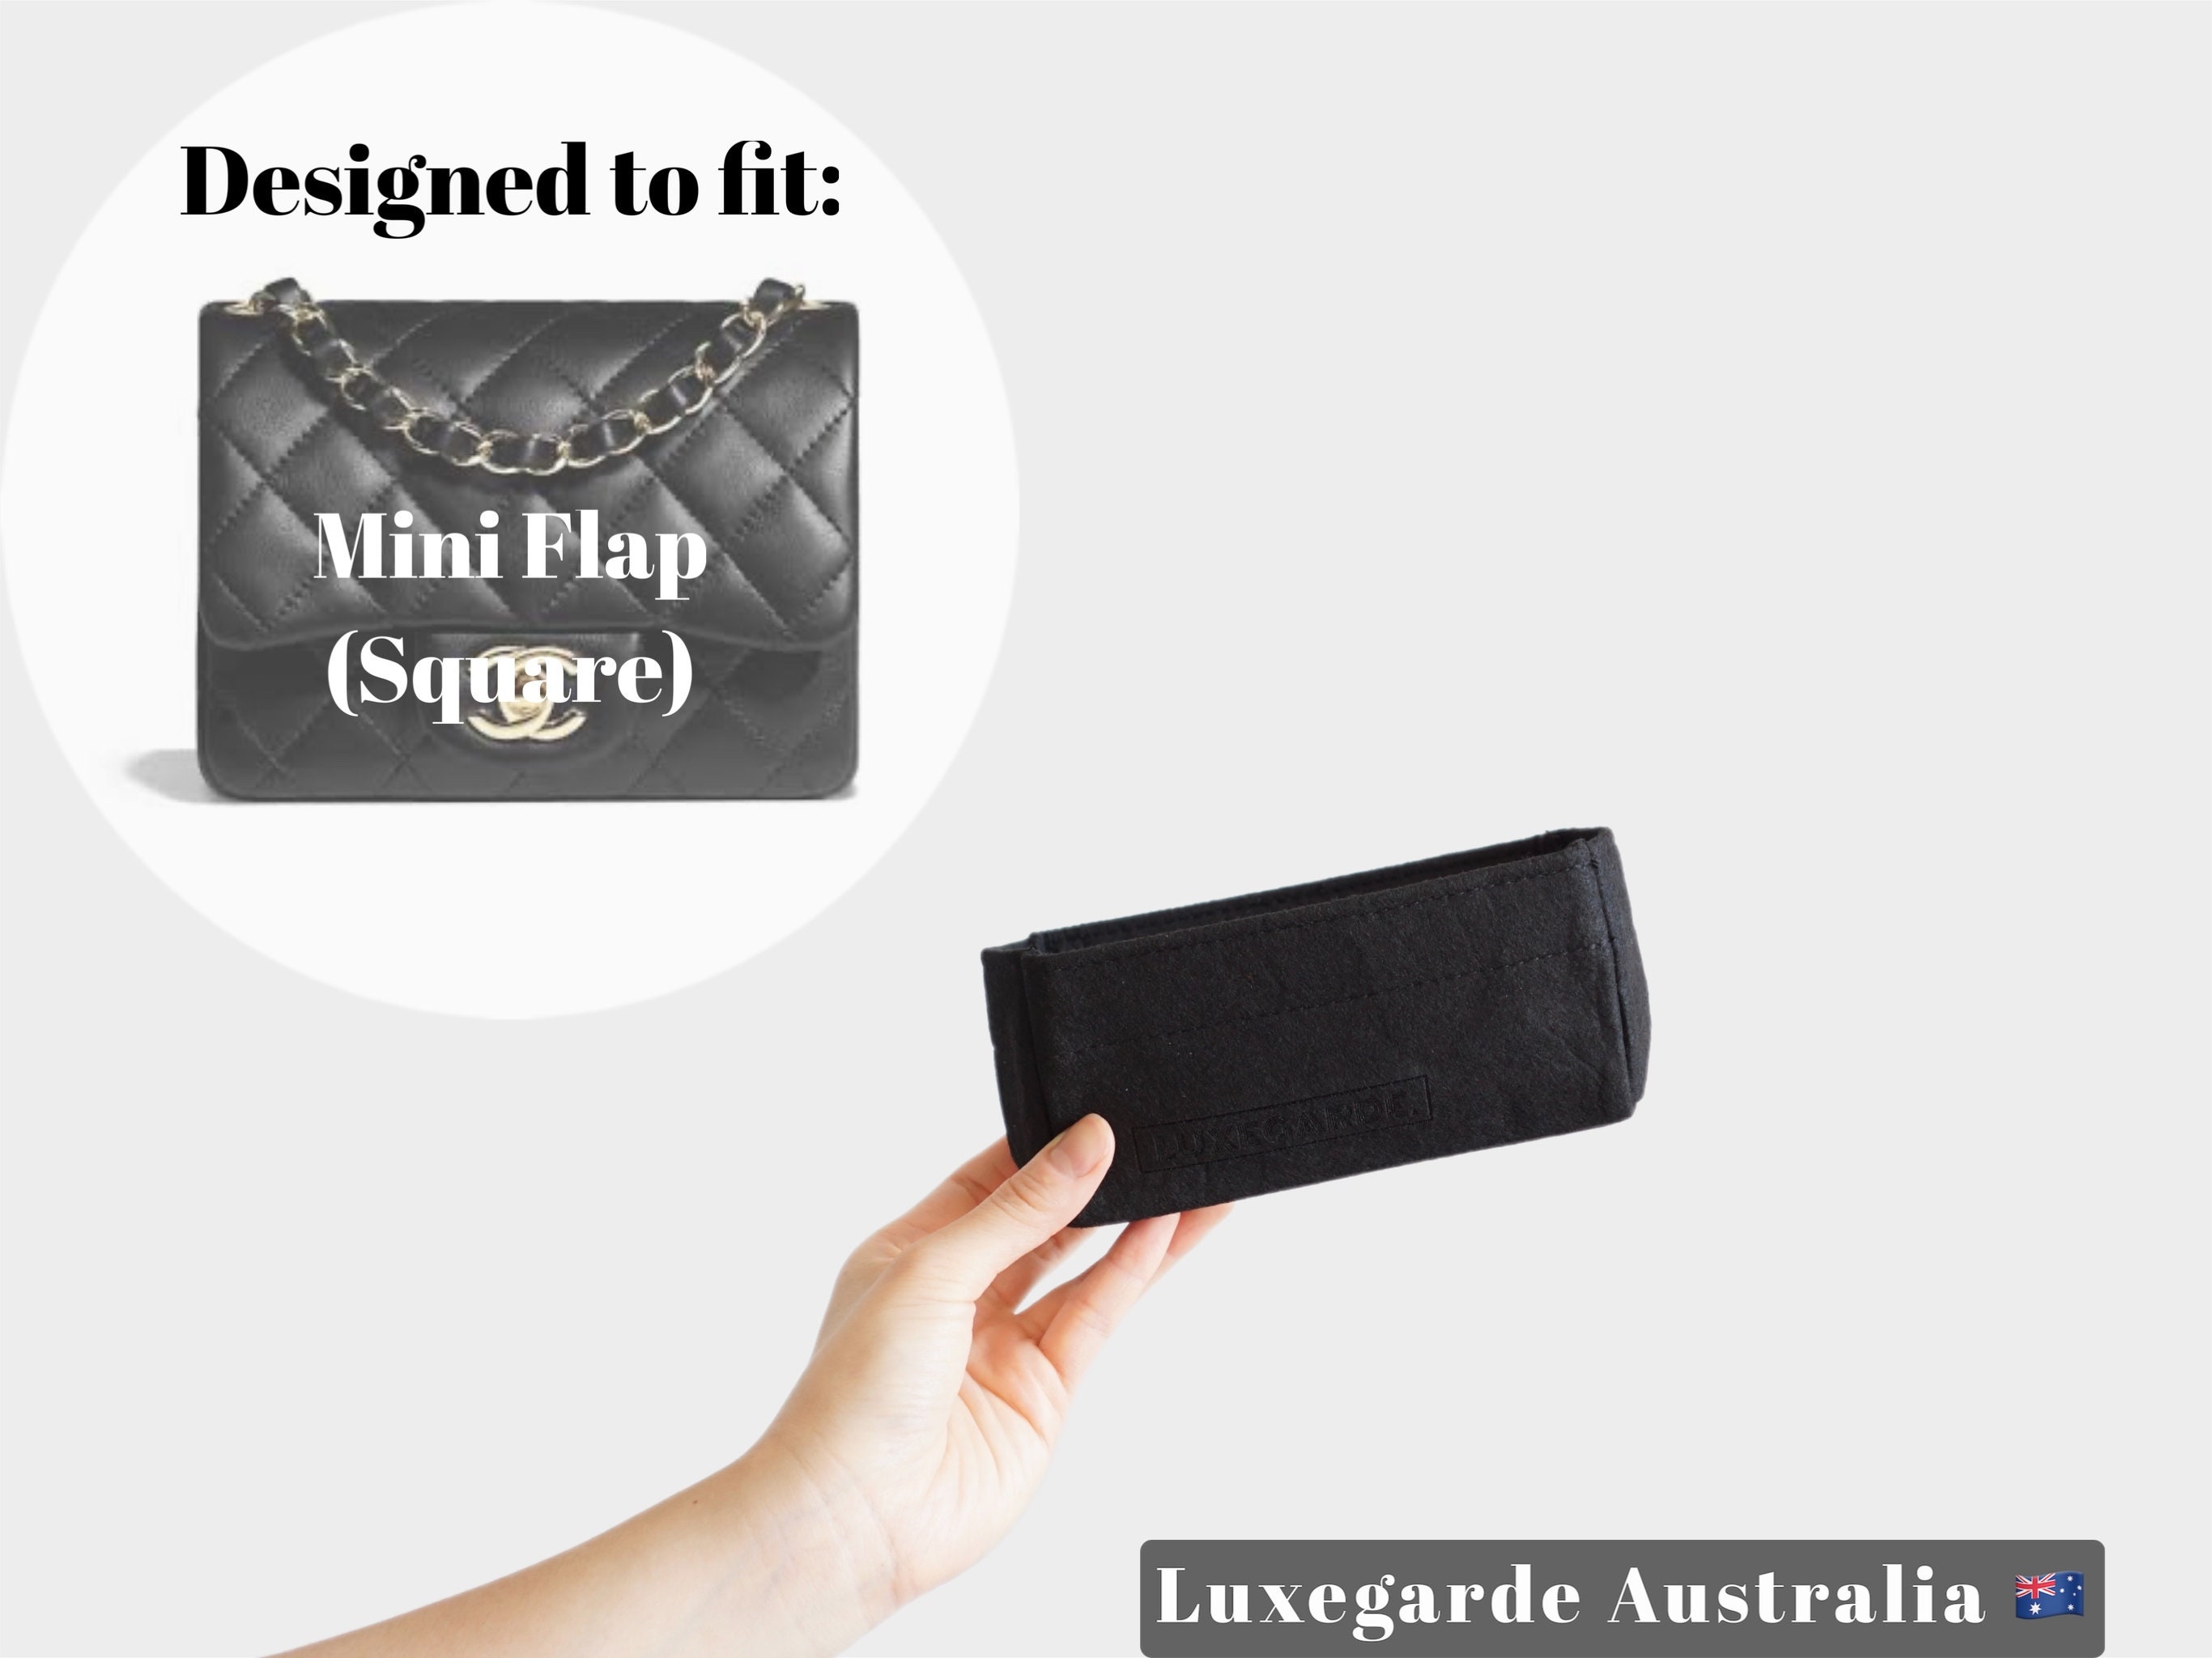 THESE ARE NOT IT ANYMORE  DESIGNER IT BAGS THAT LOST THEIR IT POPULARITY  